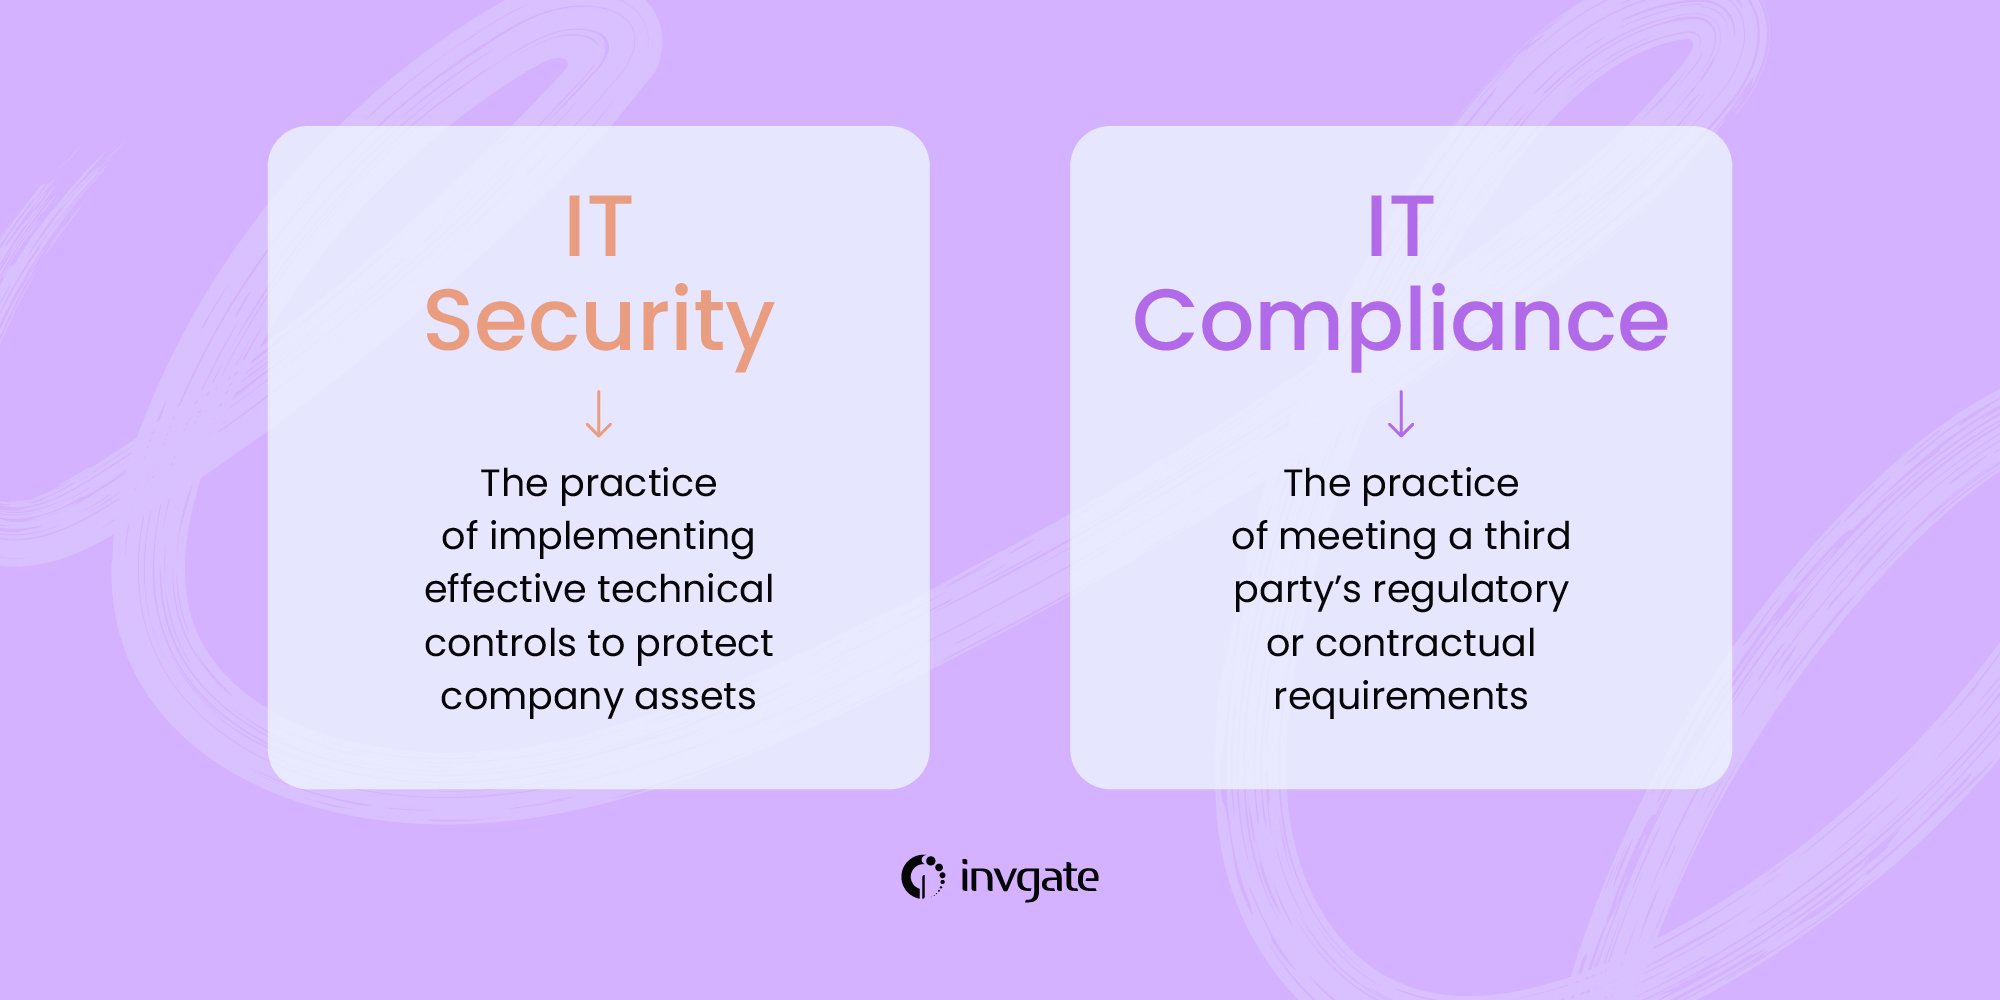 The difference between IT security and IT compliance